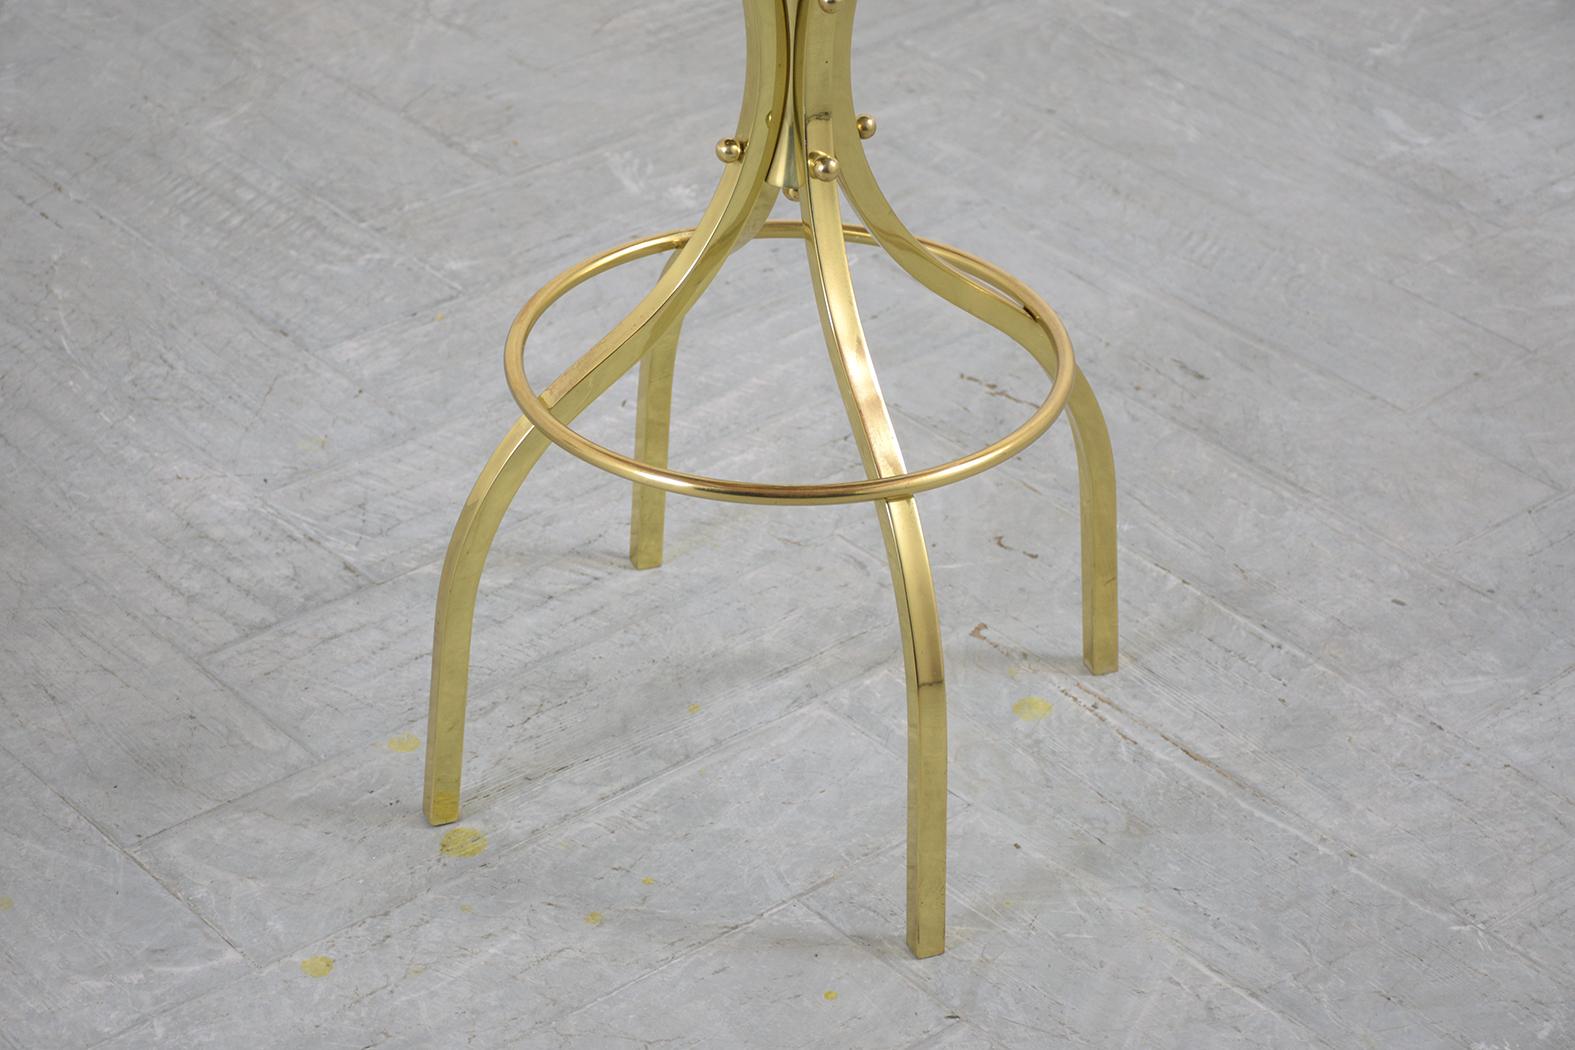 Restored Mid-Century Brass Swivel Bar Stools with Patterned Fabric Seats For Sale 1